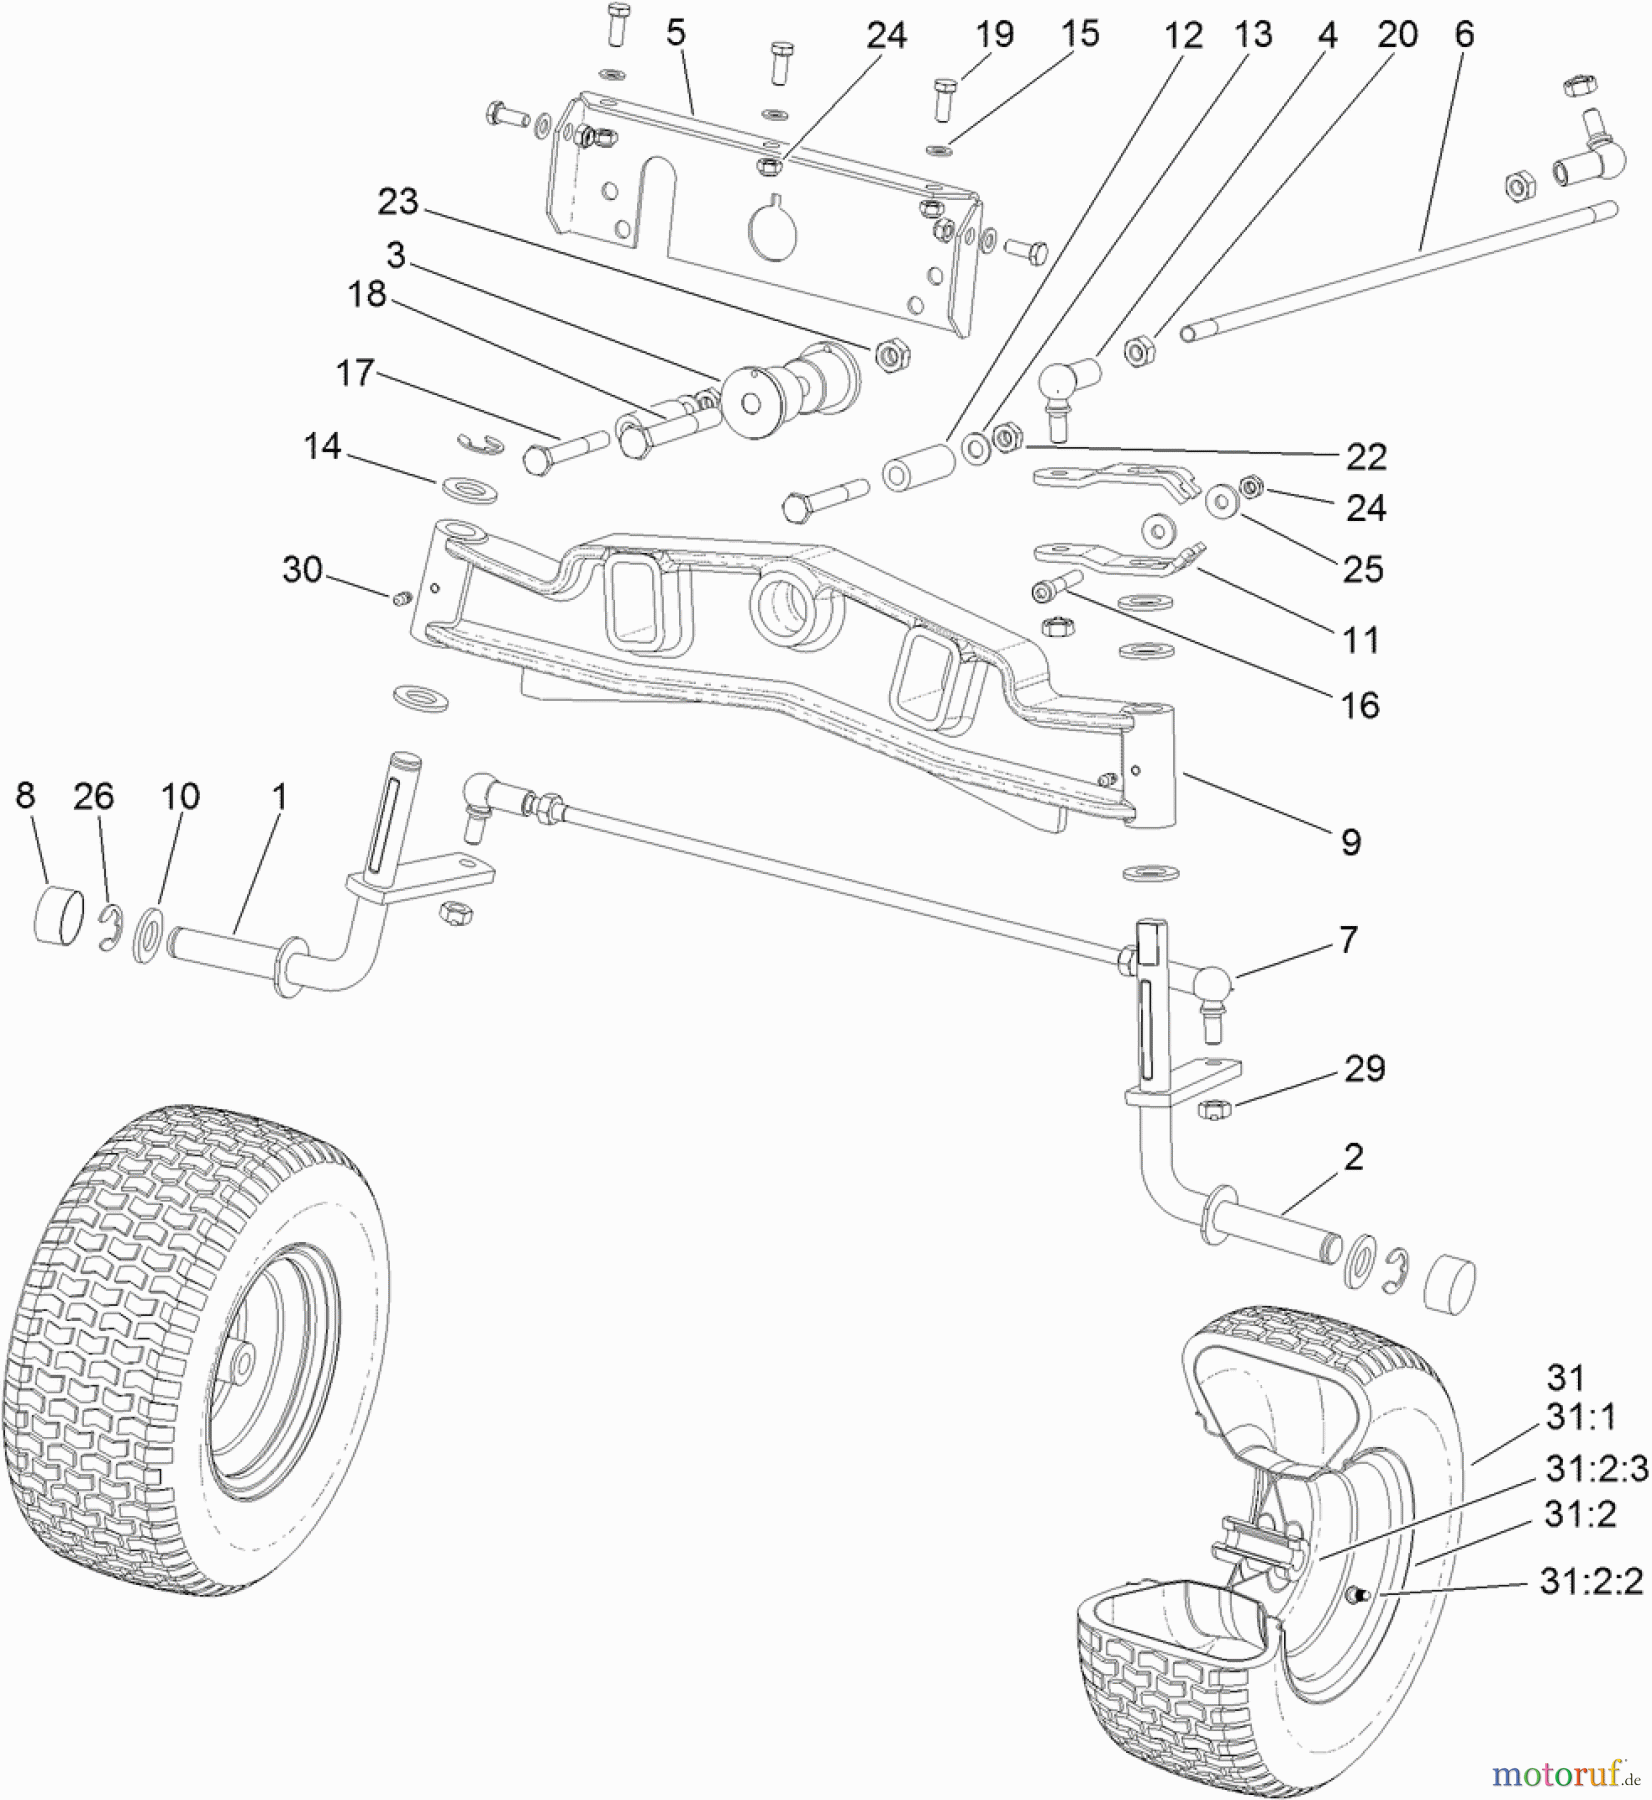  Toro Neu Mowers, Lawn & Garden Tractor Seite 1 74596 (DH 220) - Toro DH 220 Lawn Tractor, 2012 (SN 312000001-312999999) FRONT AXLE ASSEMBLY